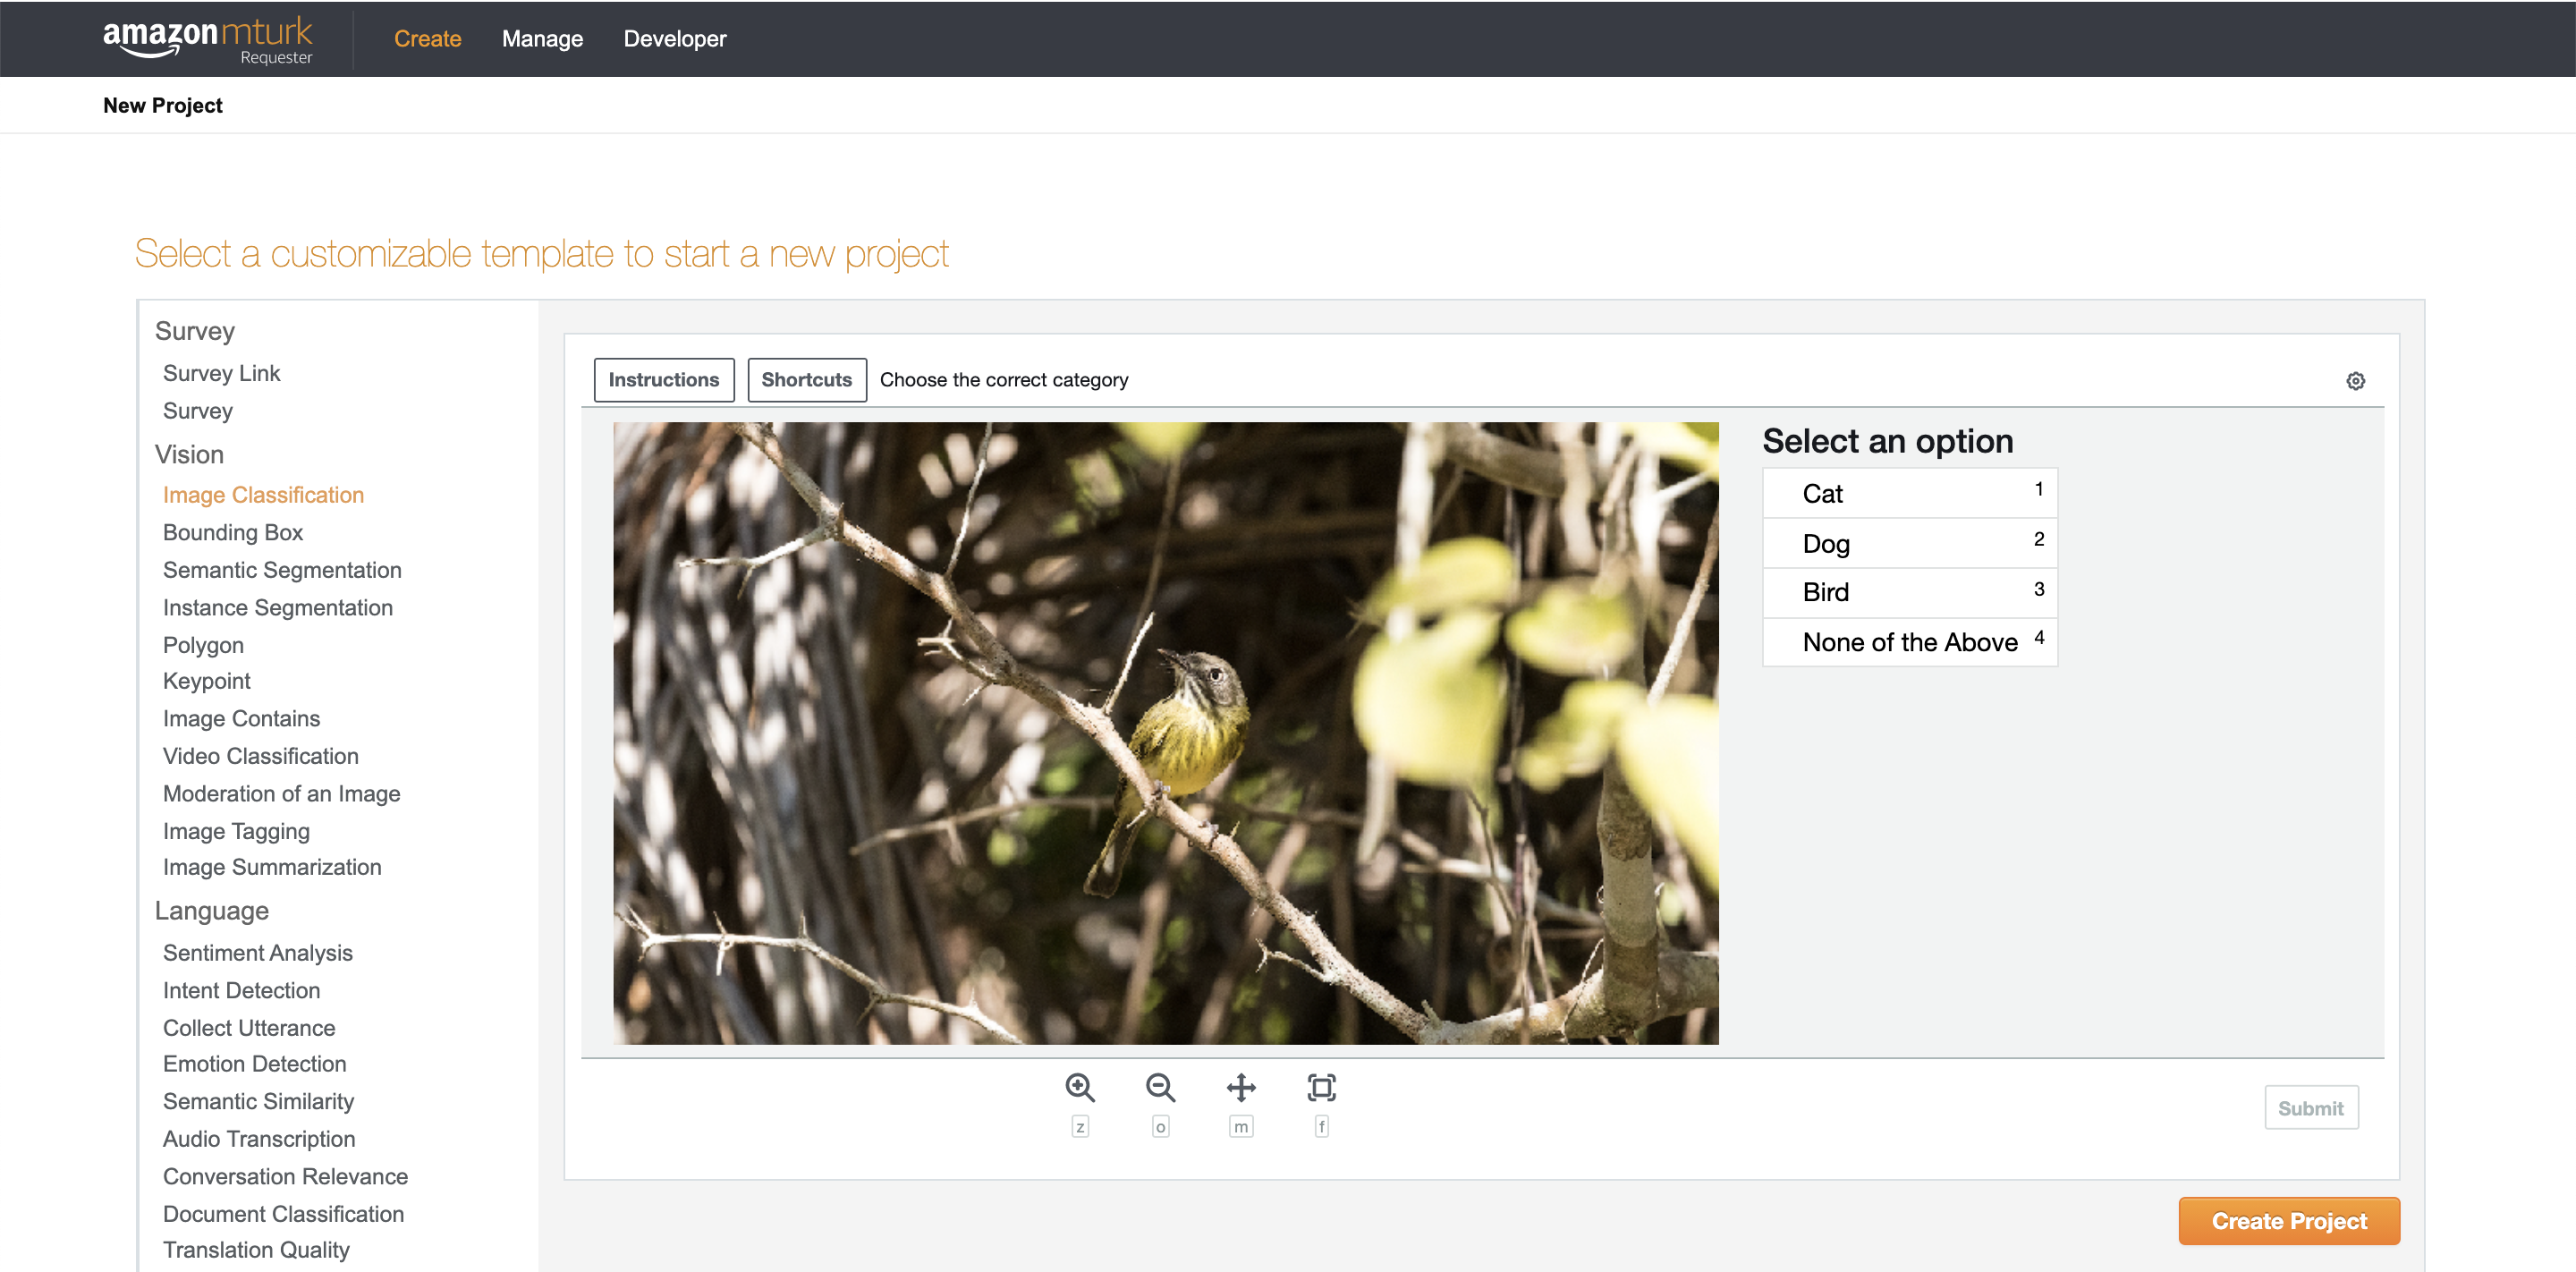 Click on the Create tab to start building a New Project